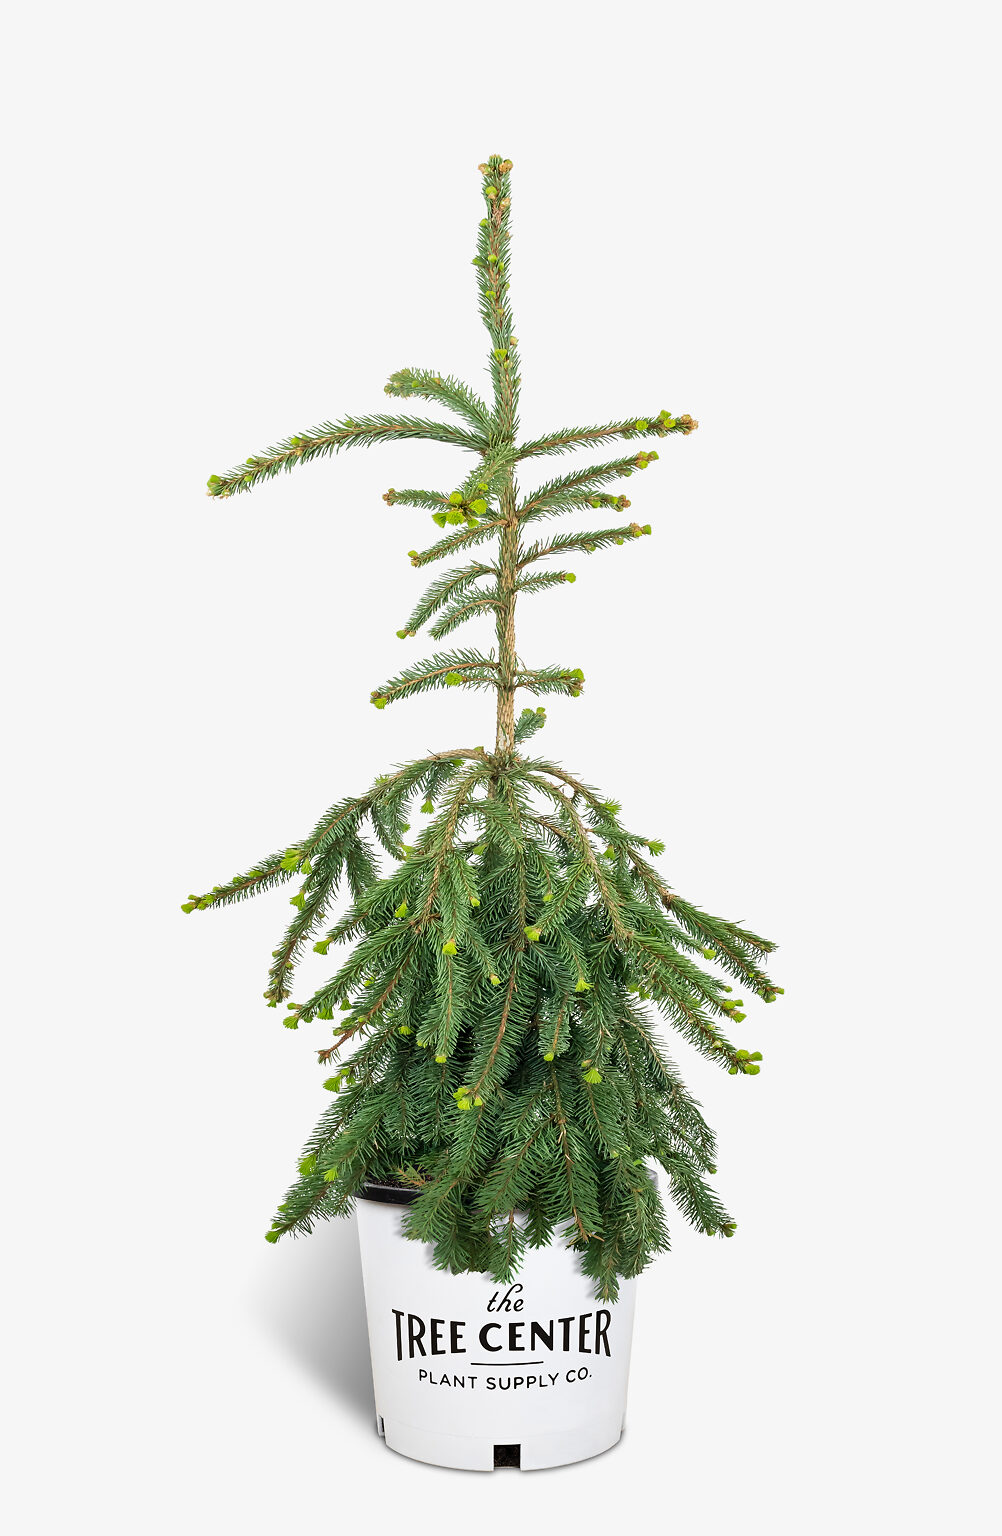 Weeping Norway Spruce For Sale Online The Tree Center 